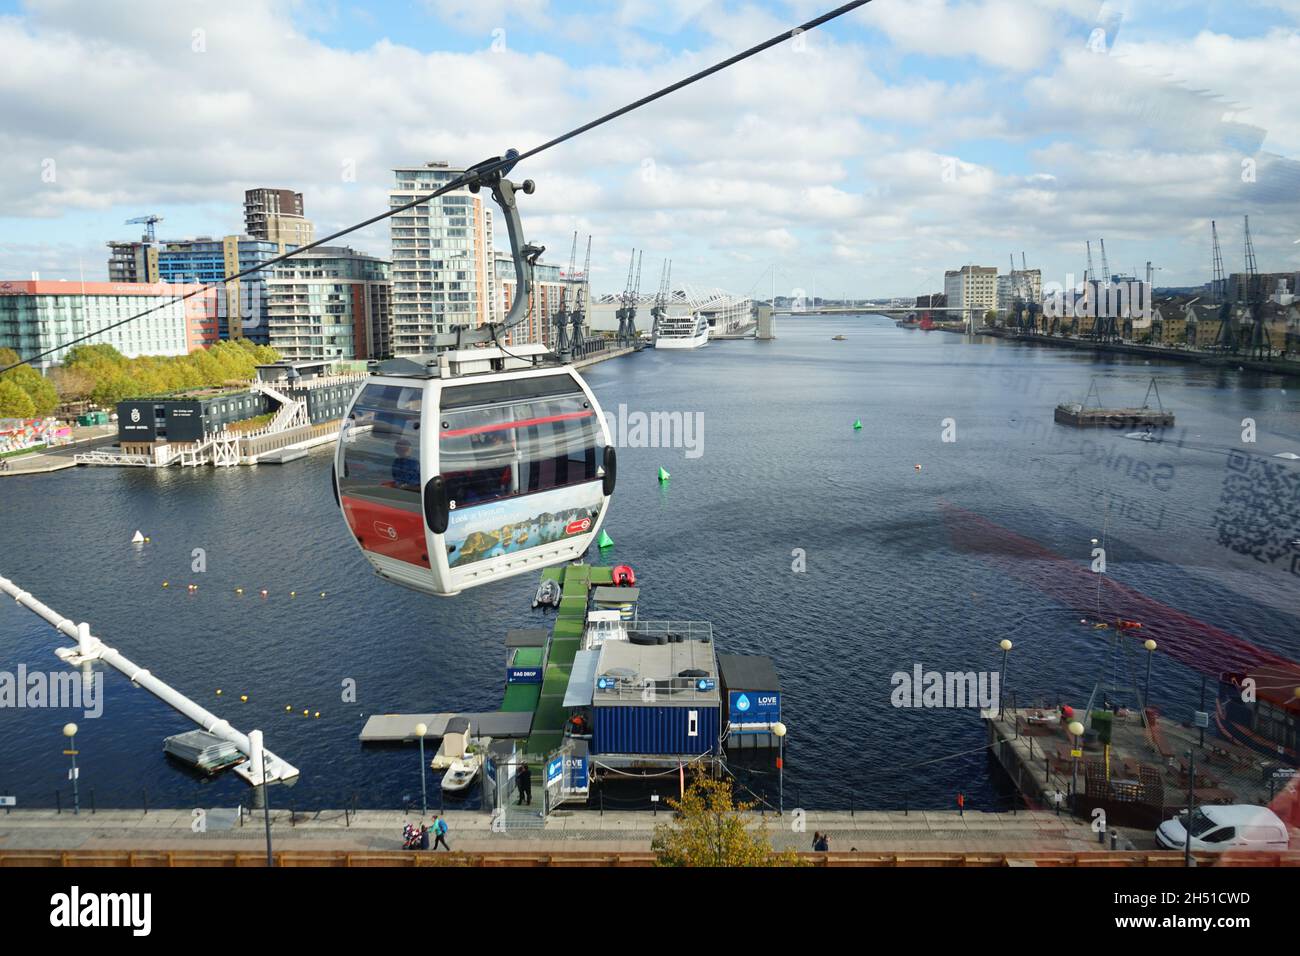 Emirates cable car zip lining over London River Thames in he U.K Stock Photo